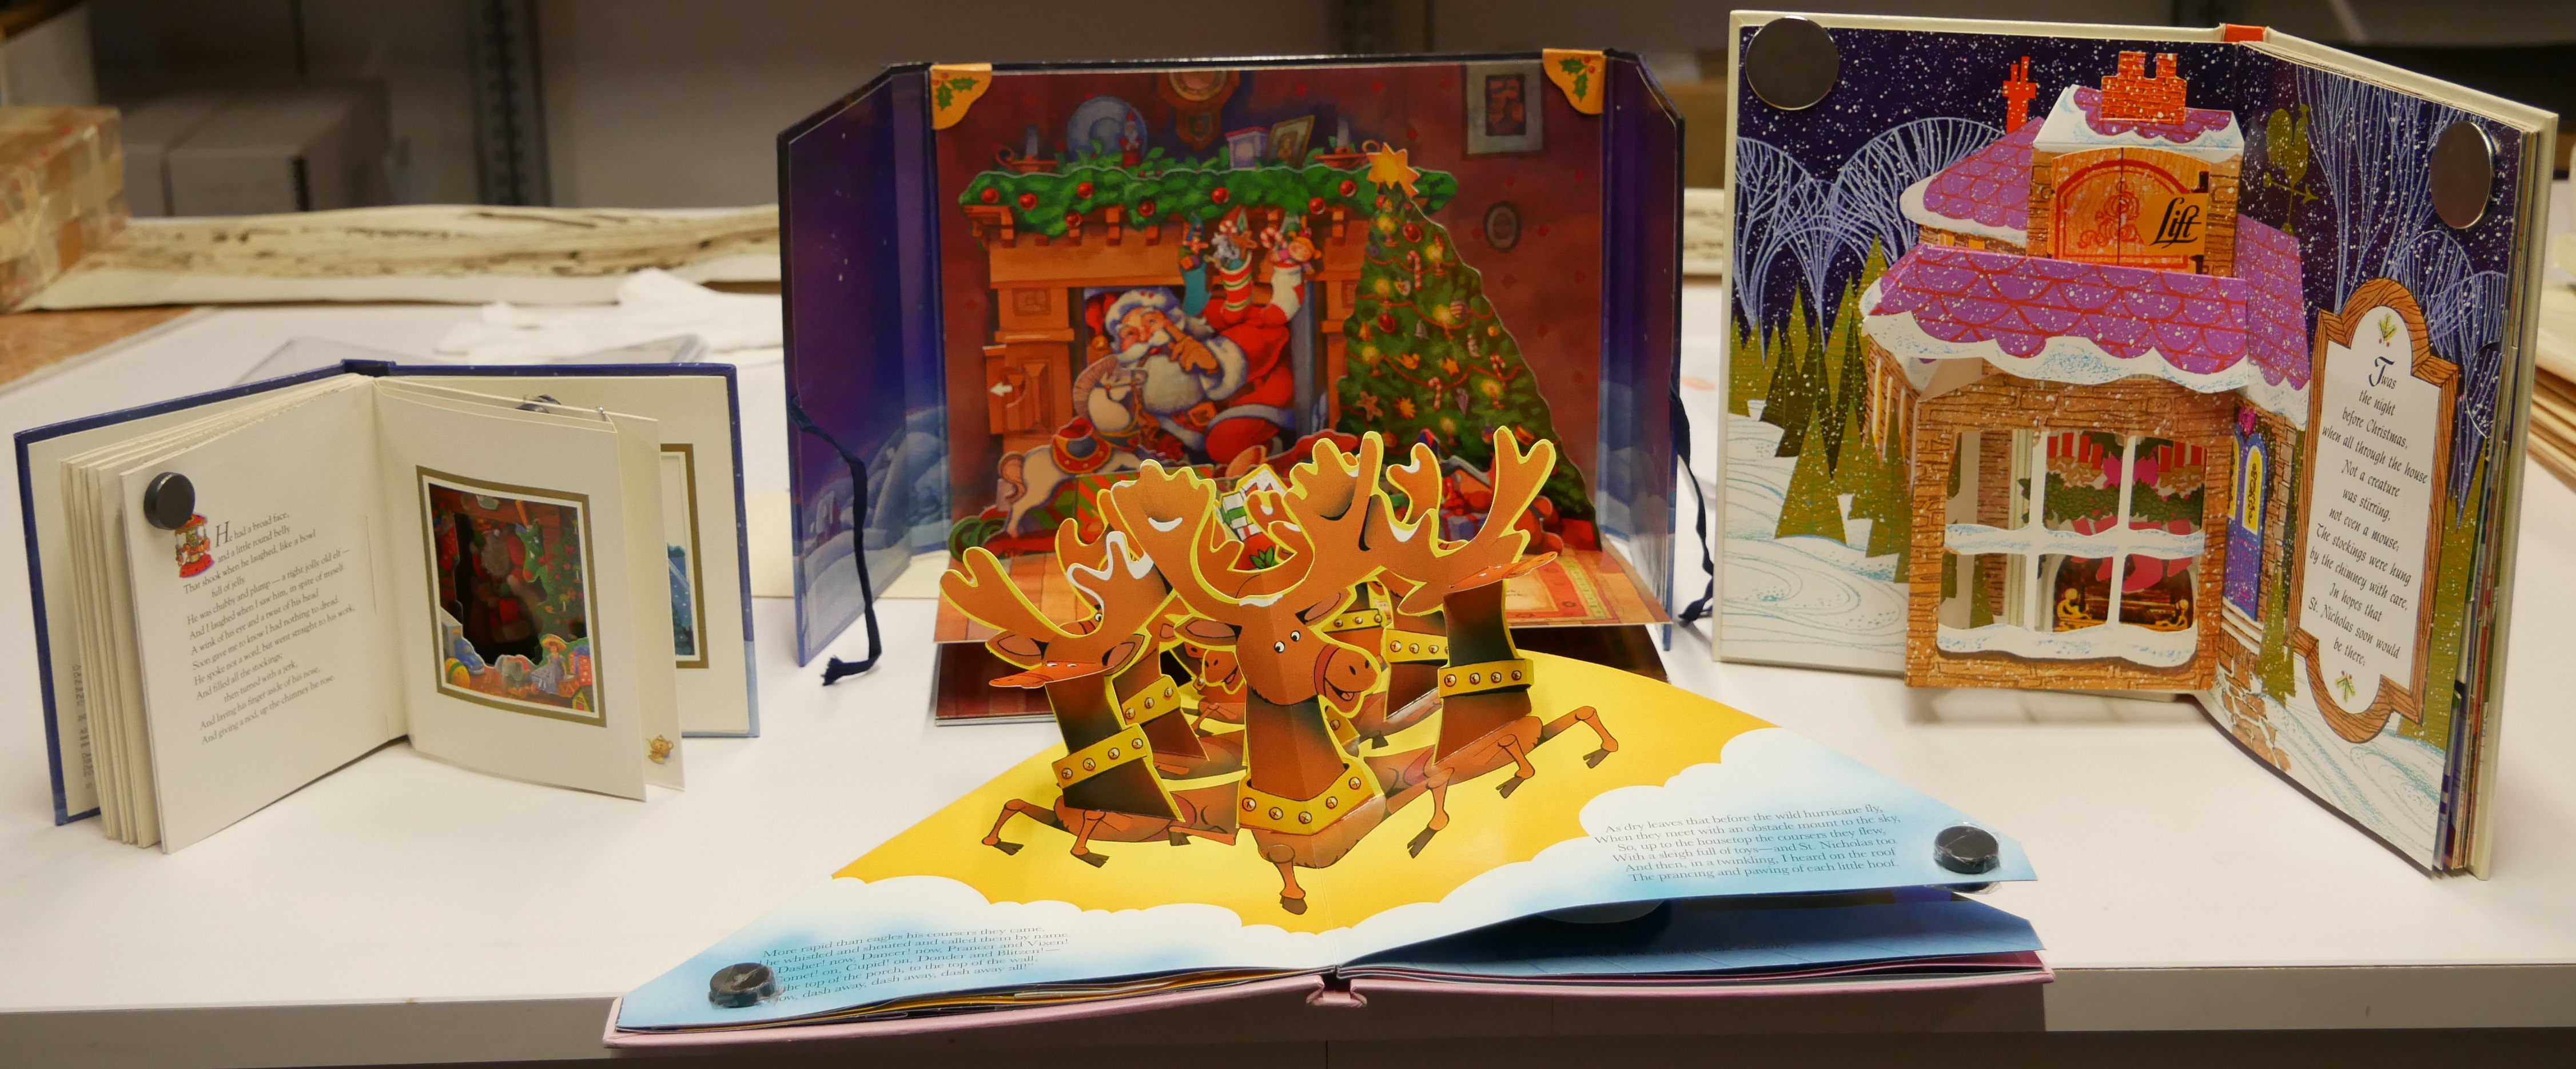 Other Pop-Up Books